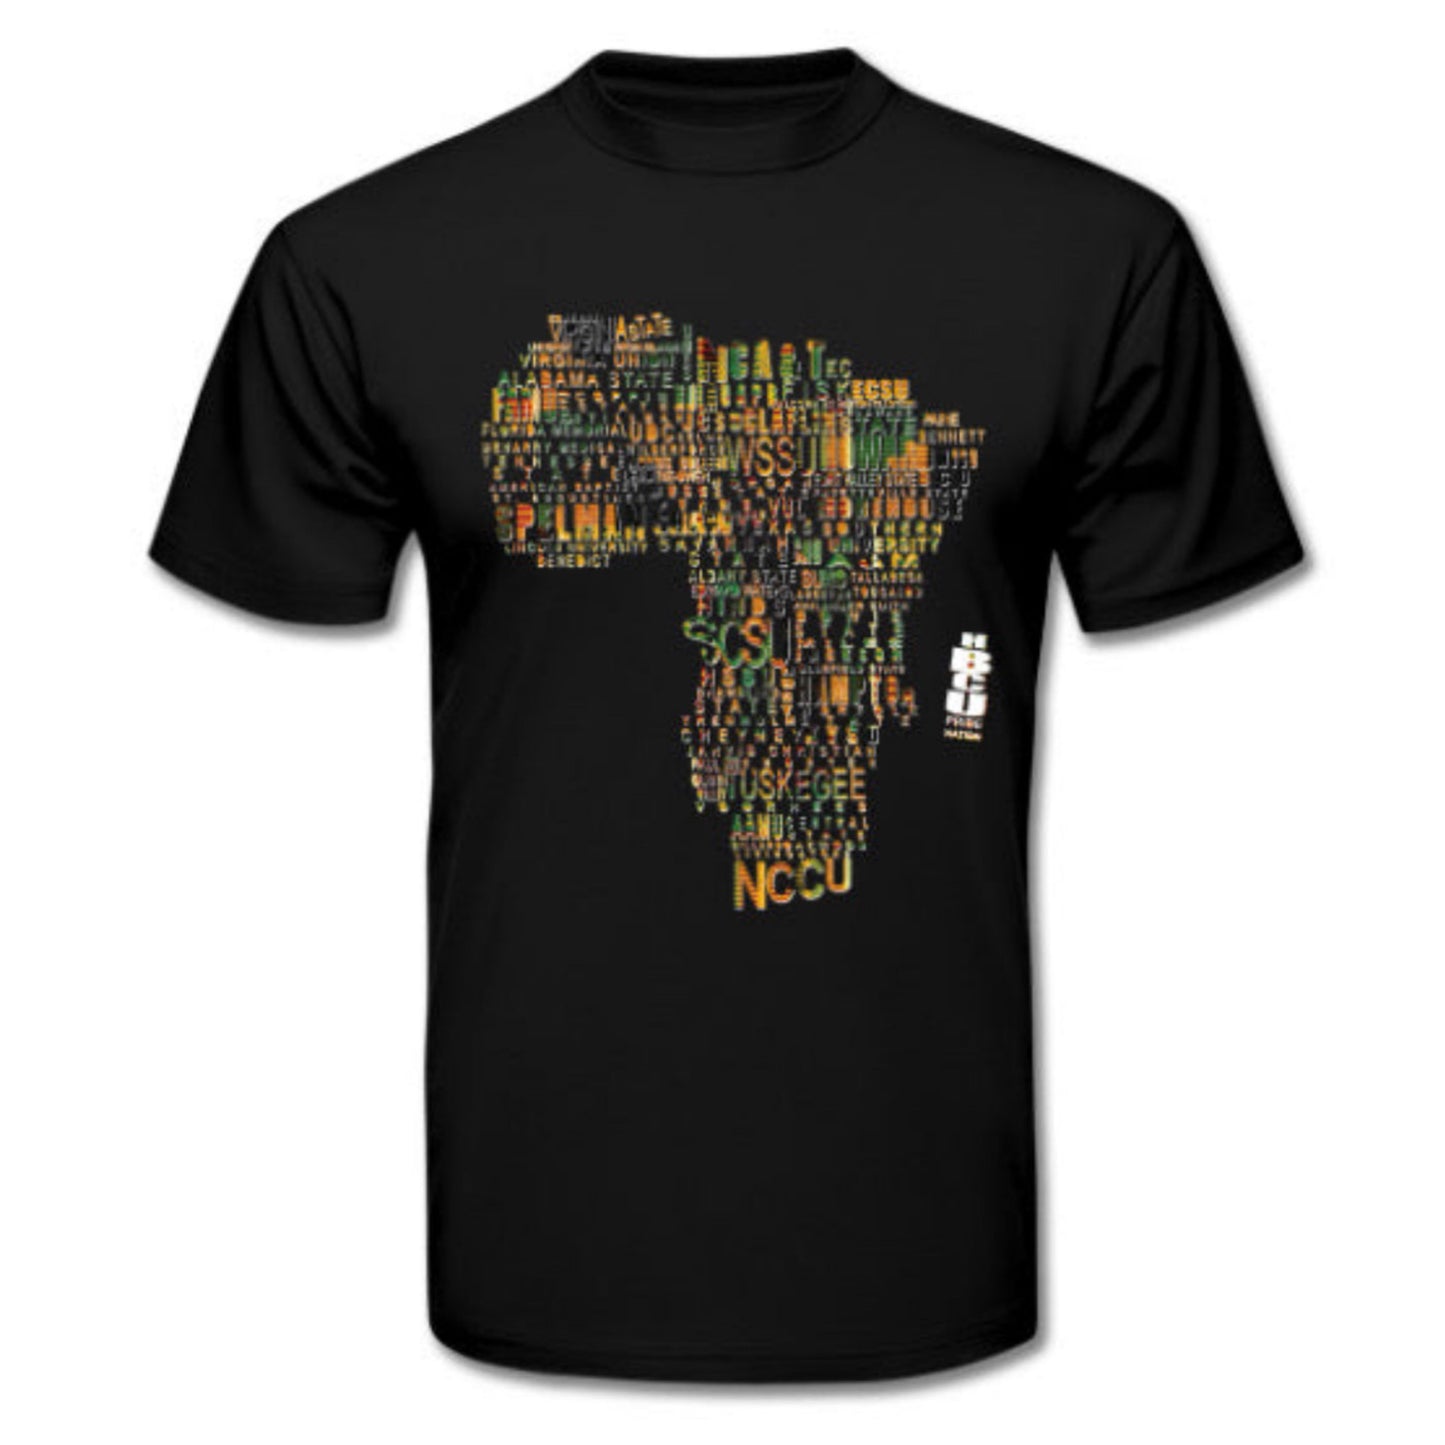 The “Homecoming” Tee in Black and Kente